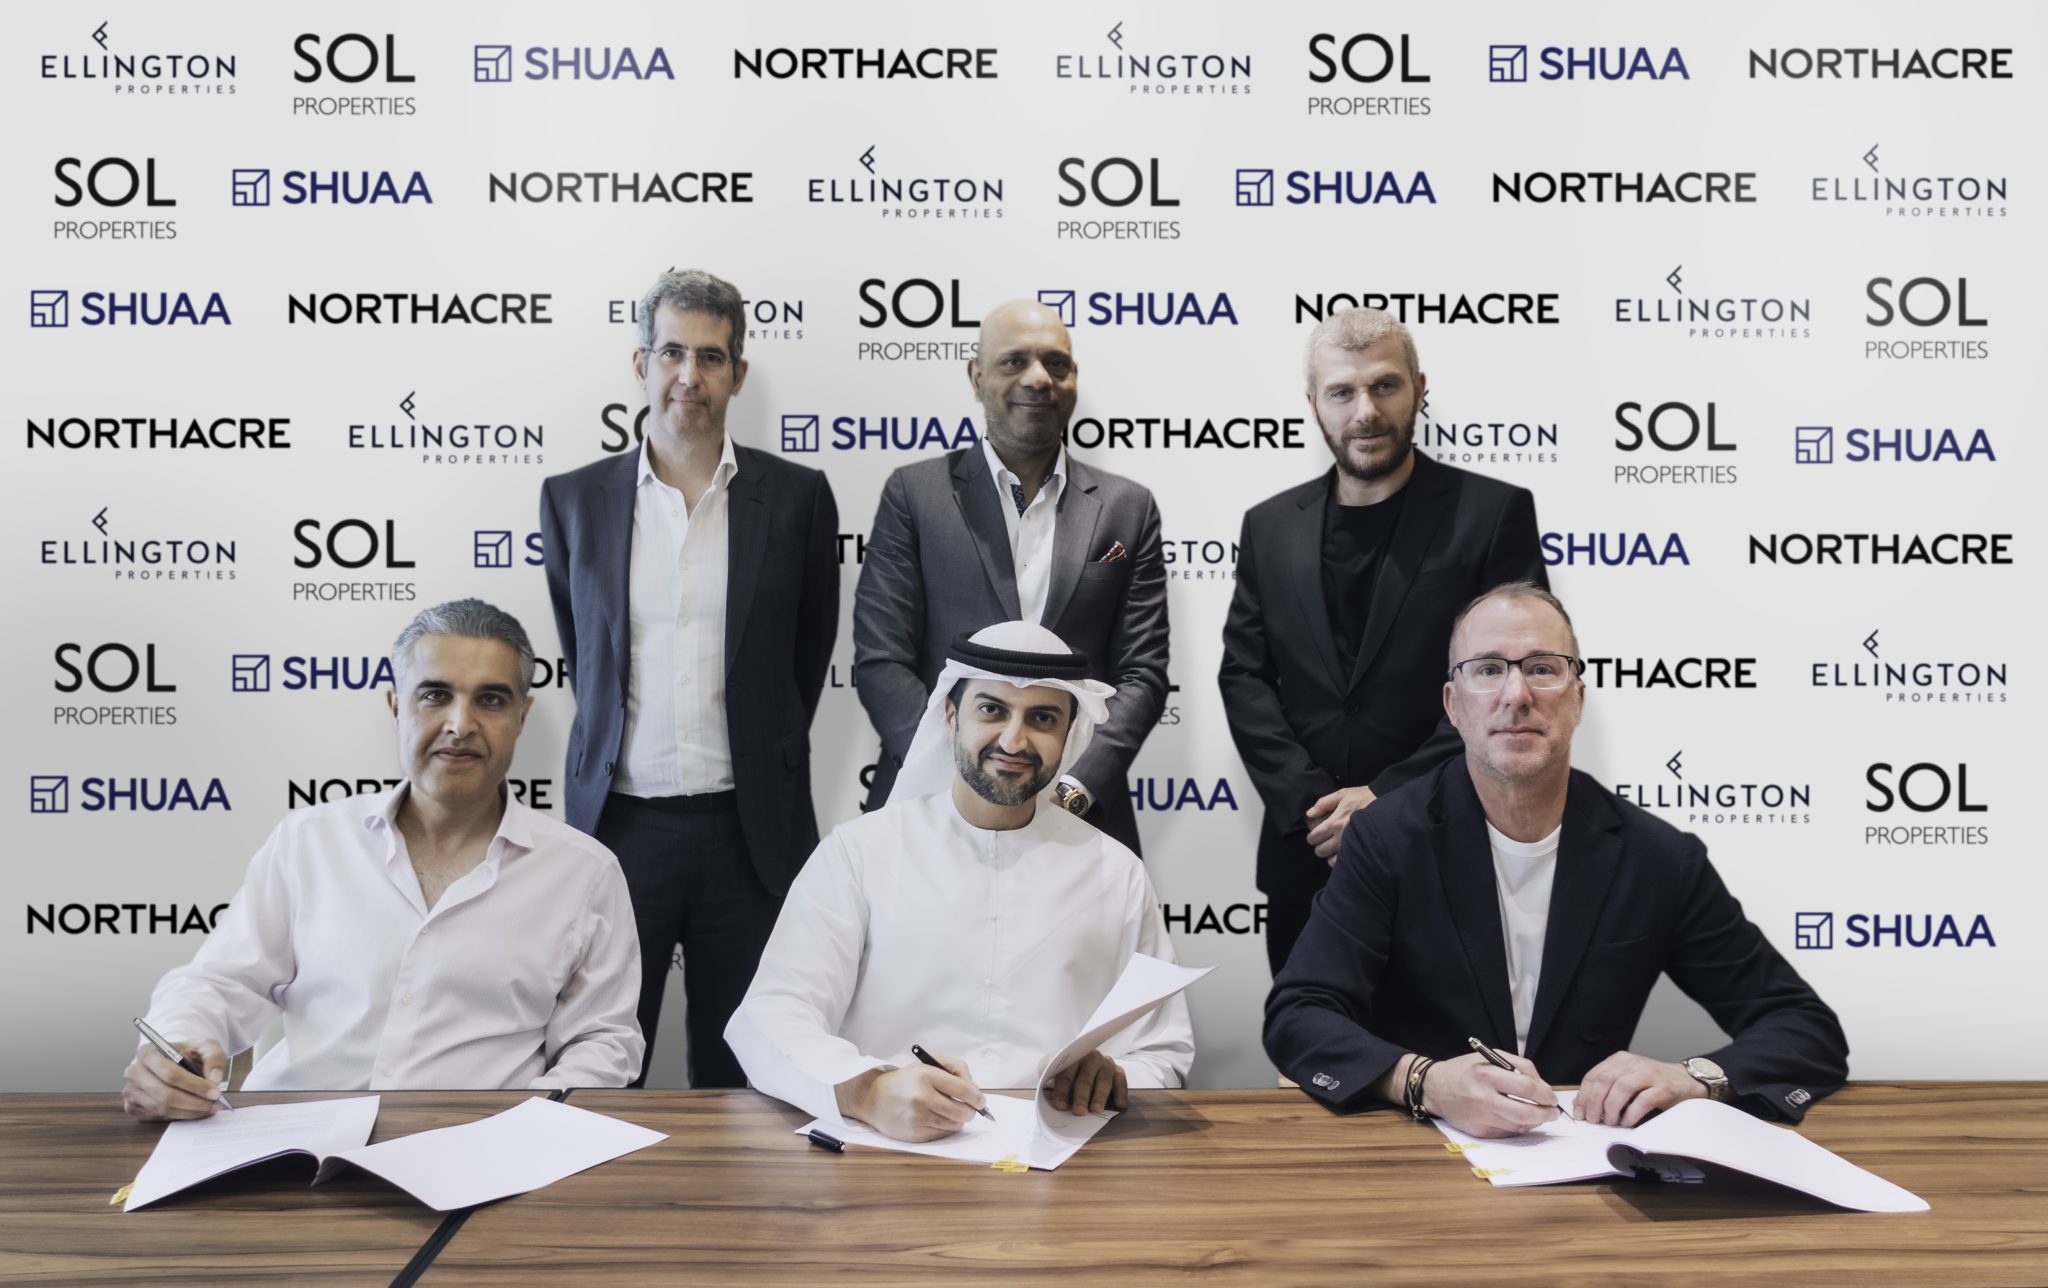 SHUAA launches three new Sharia-compliant funds; brings assets under management on Shariah-compliant platform to more than USD 200 million